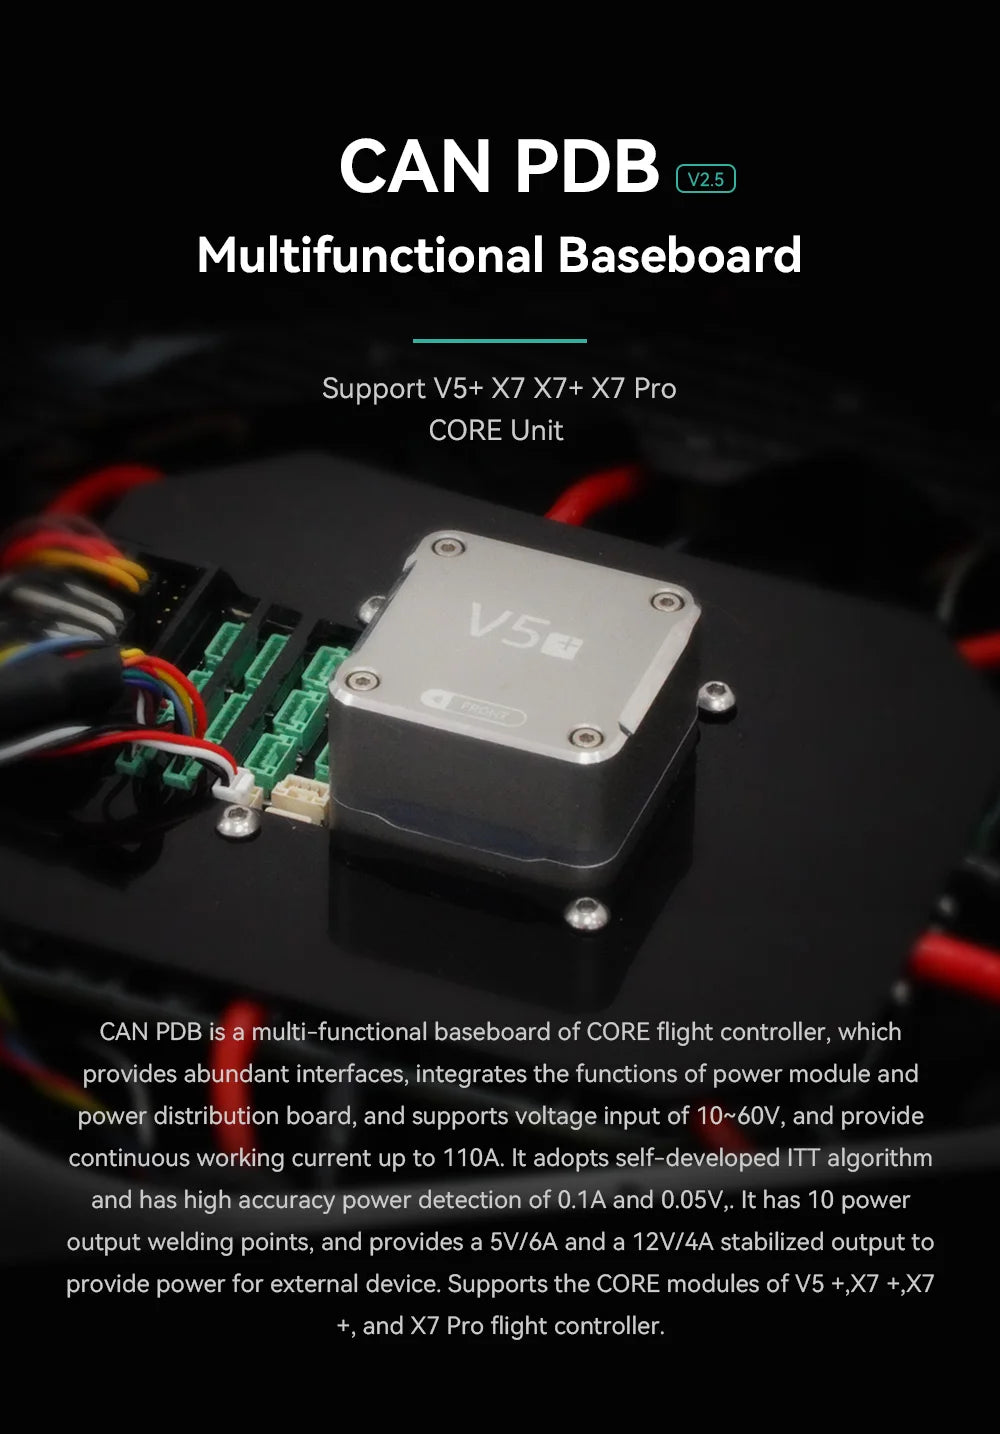 CUAV New CAN PDB Carrier Board, CAN PDB is a multi-functional baseboard of CORE flight controller .